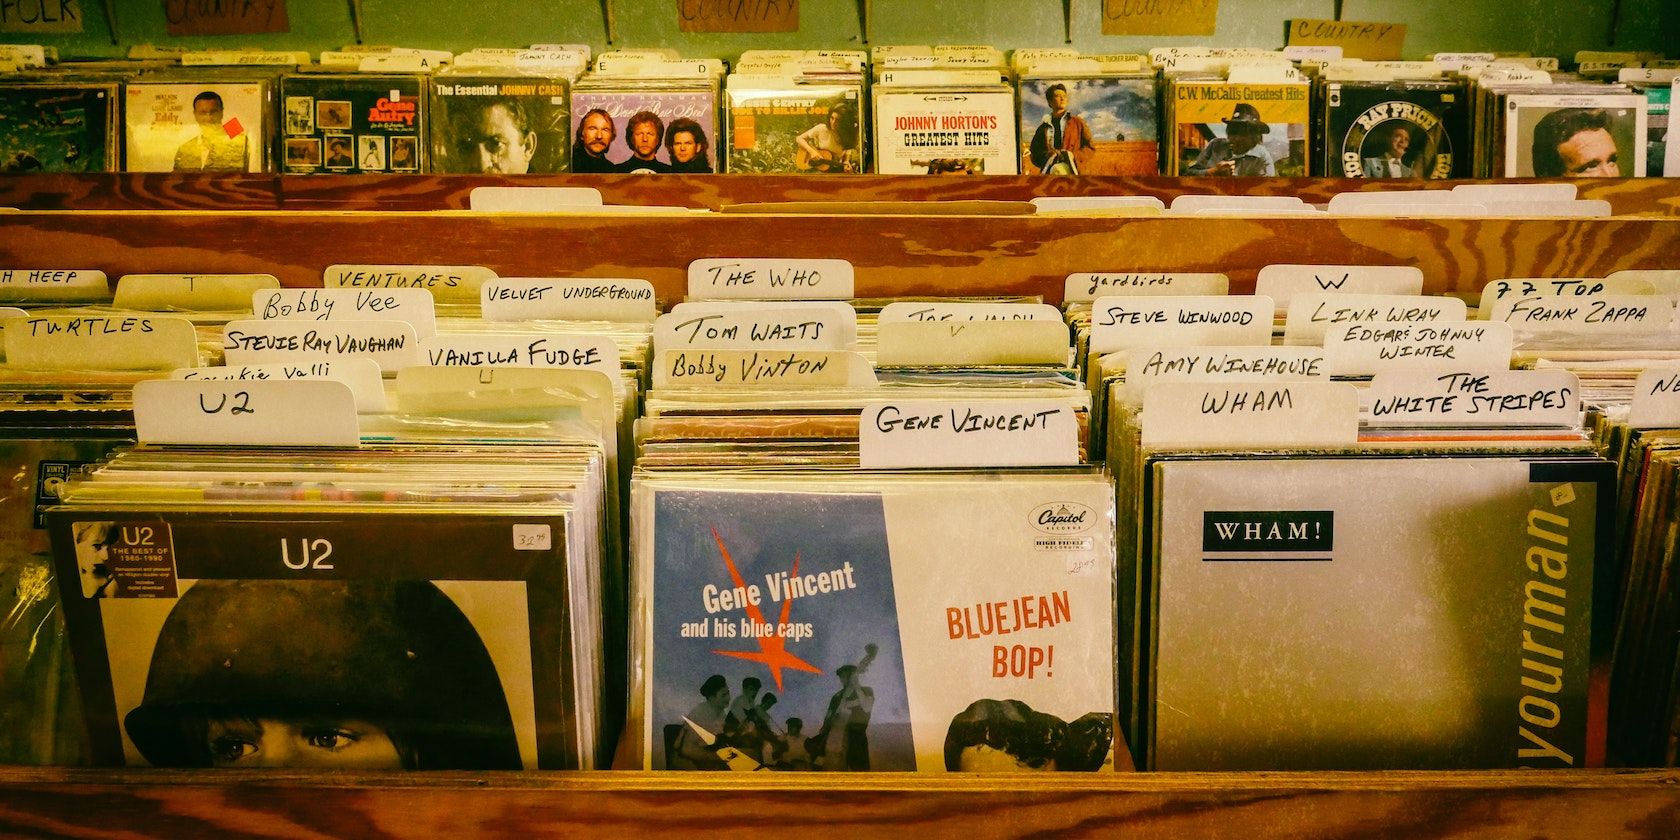 A photograph showing racks of records grouped by artist